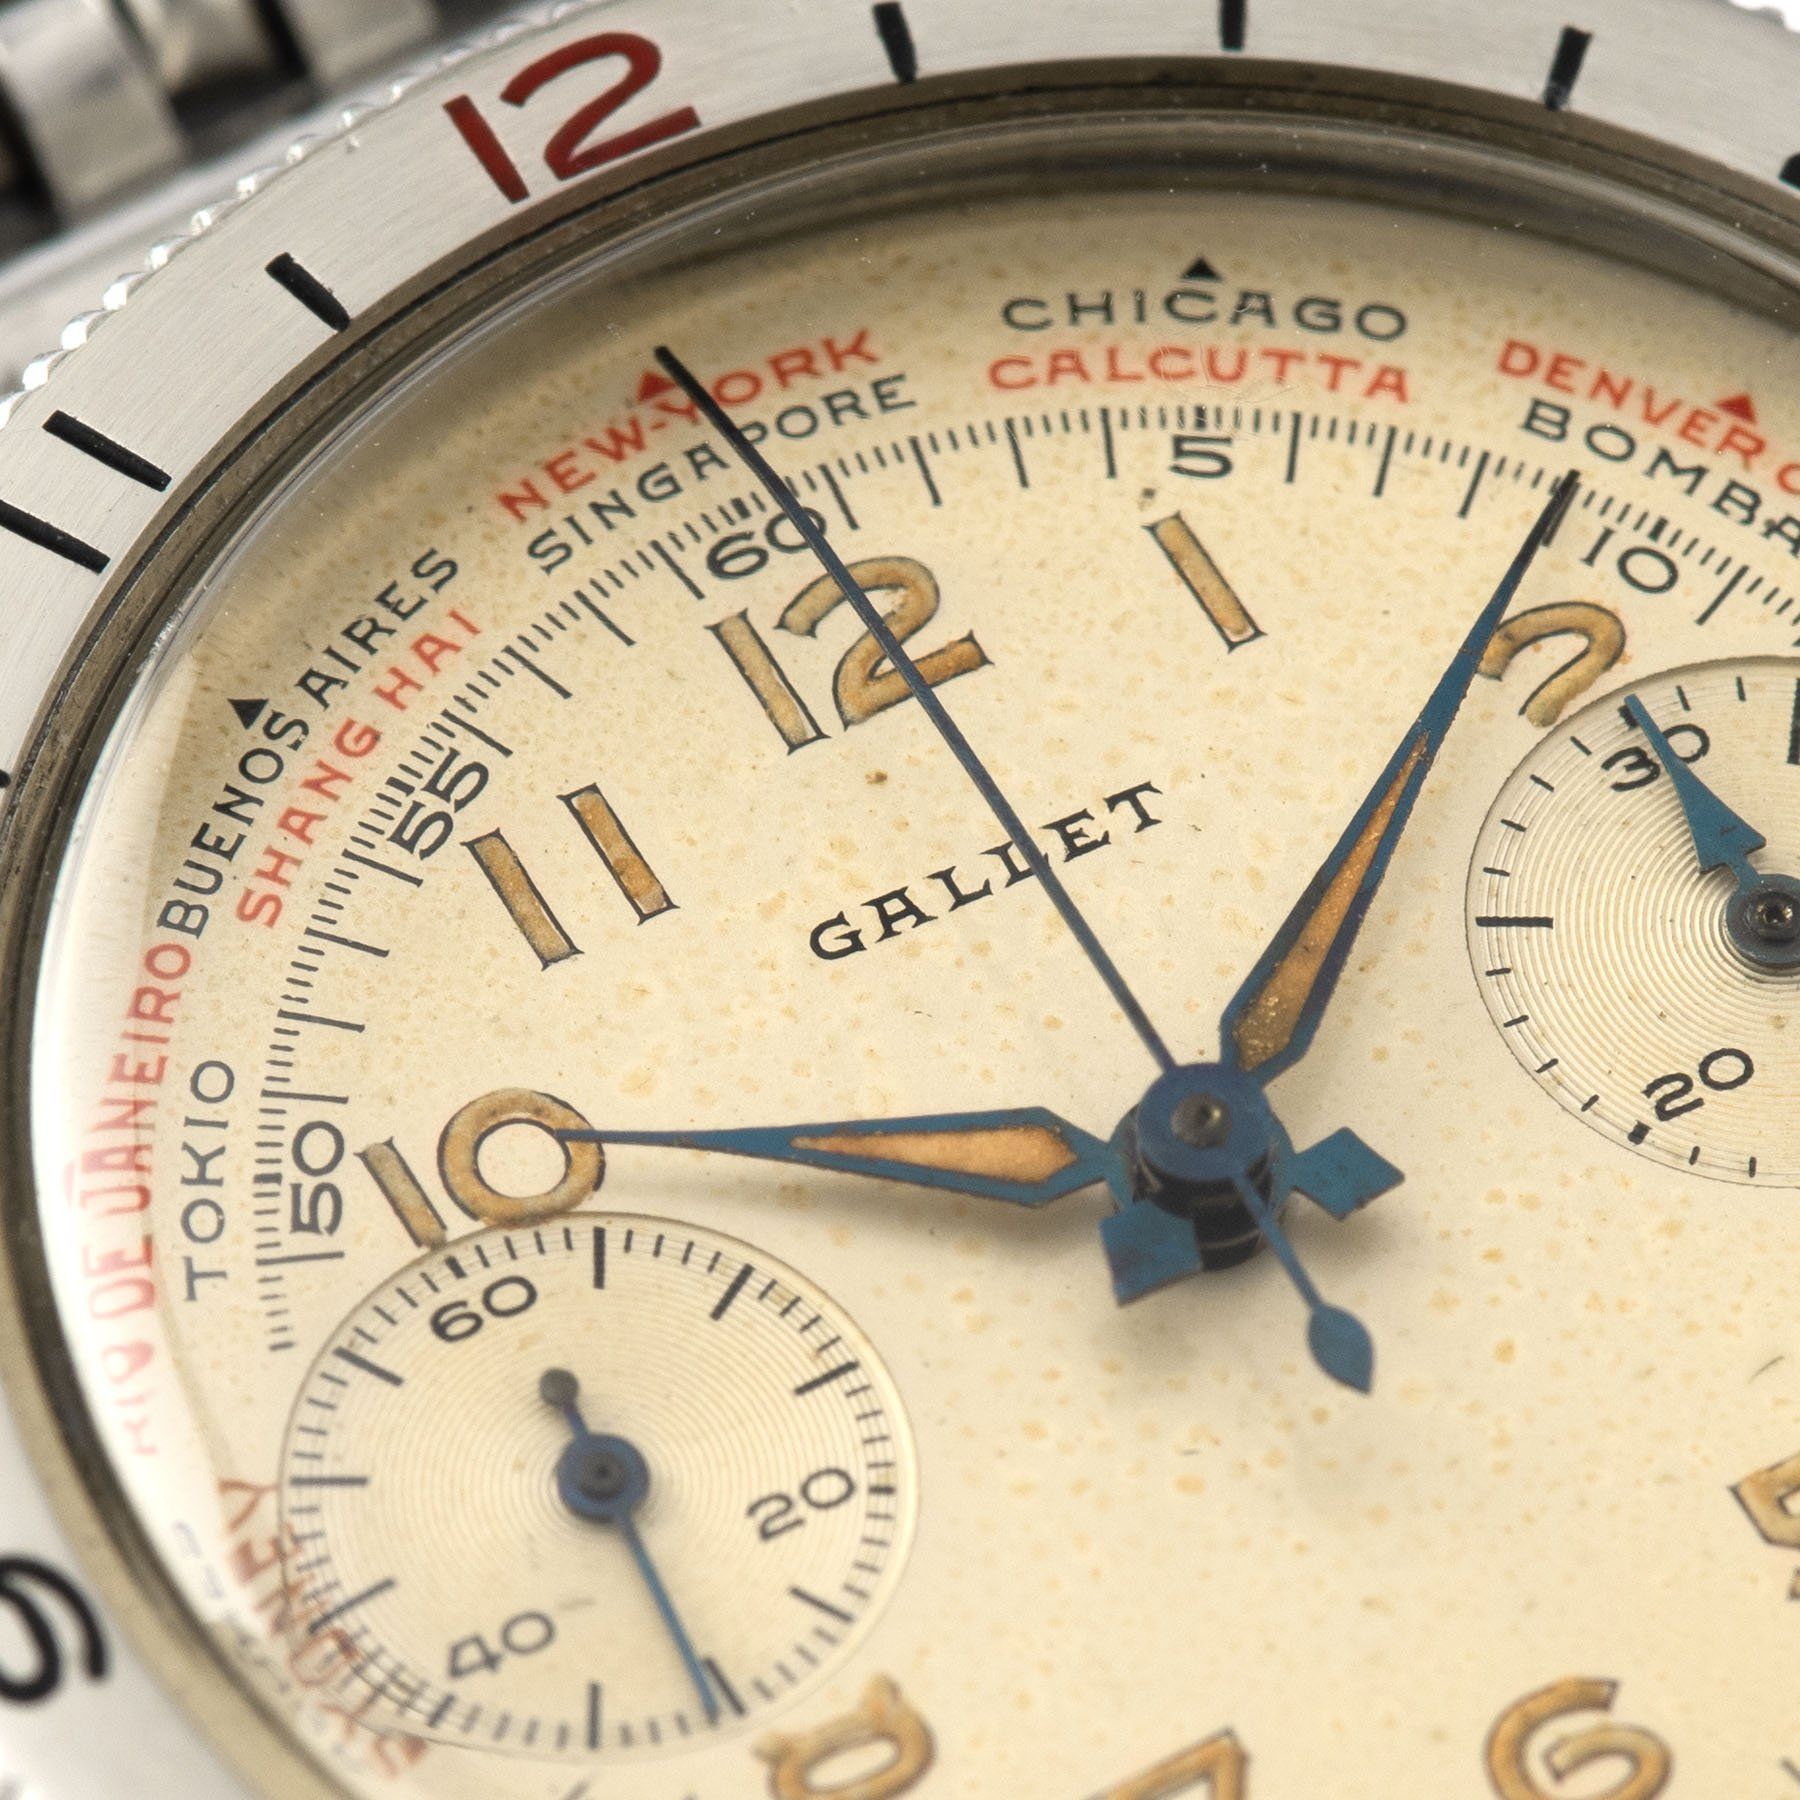 Gallet Flying Officer Chronograph 1940s